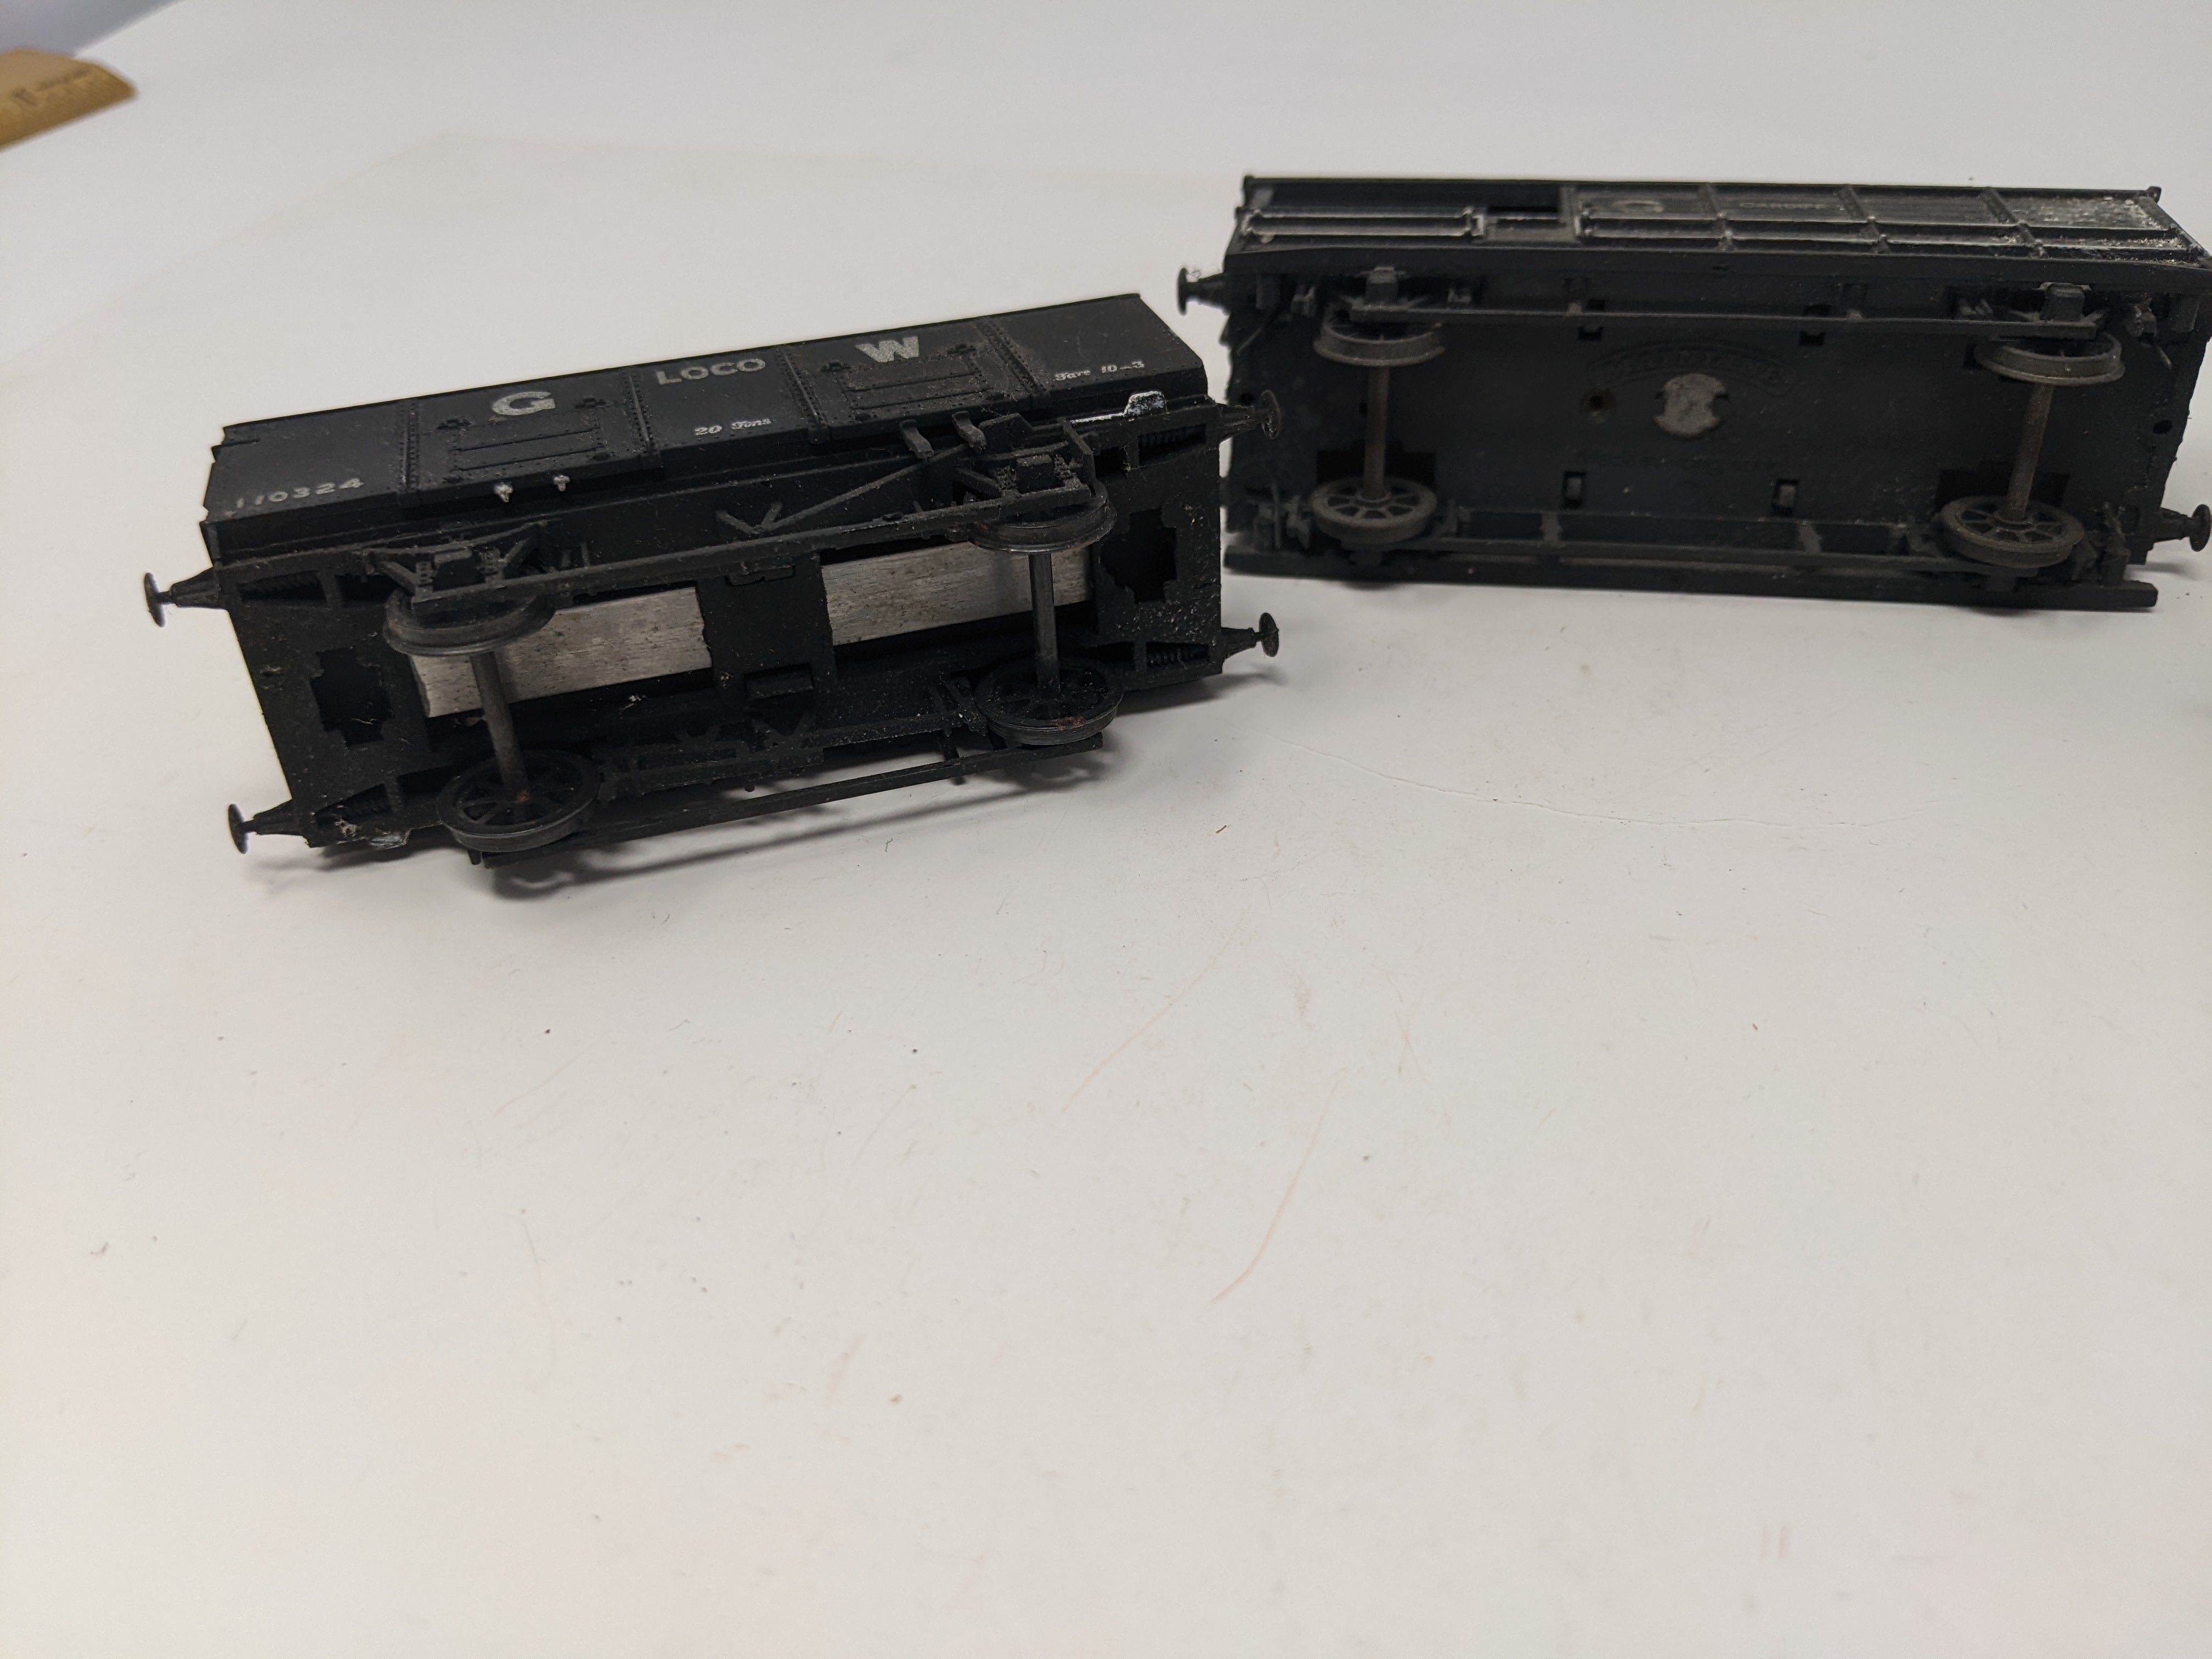 USED HO Scale, Lot of 6 Mainline & Hornby Wagons, Milk Tank Cars + more, Read Description